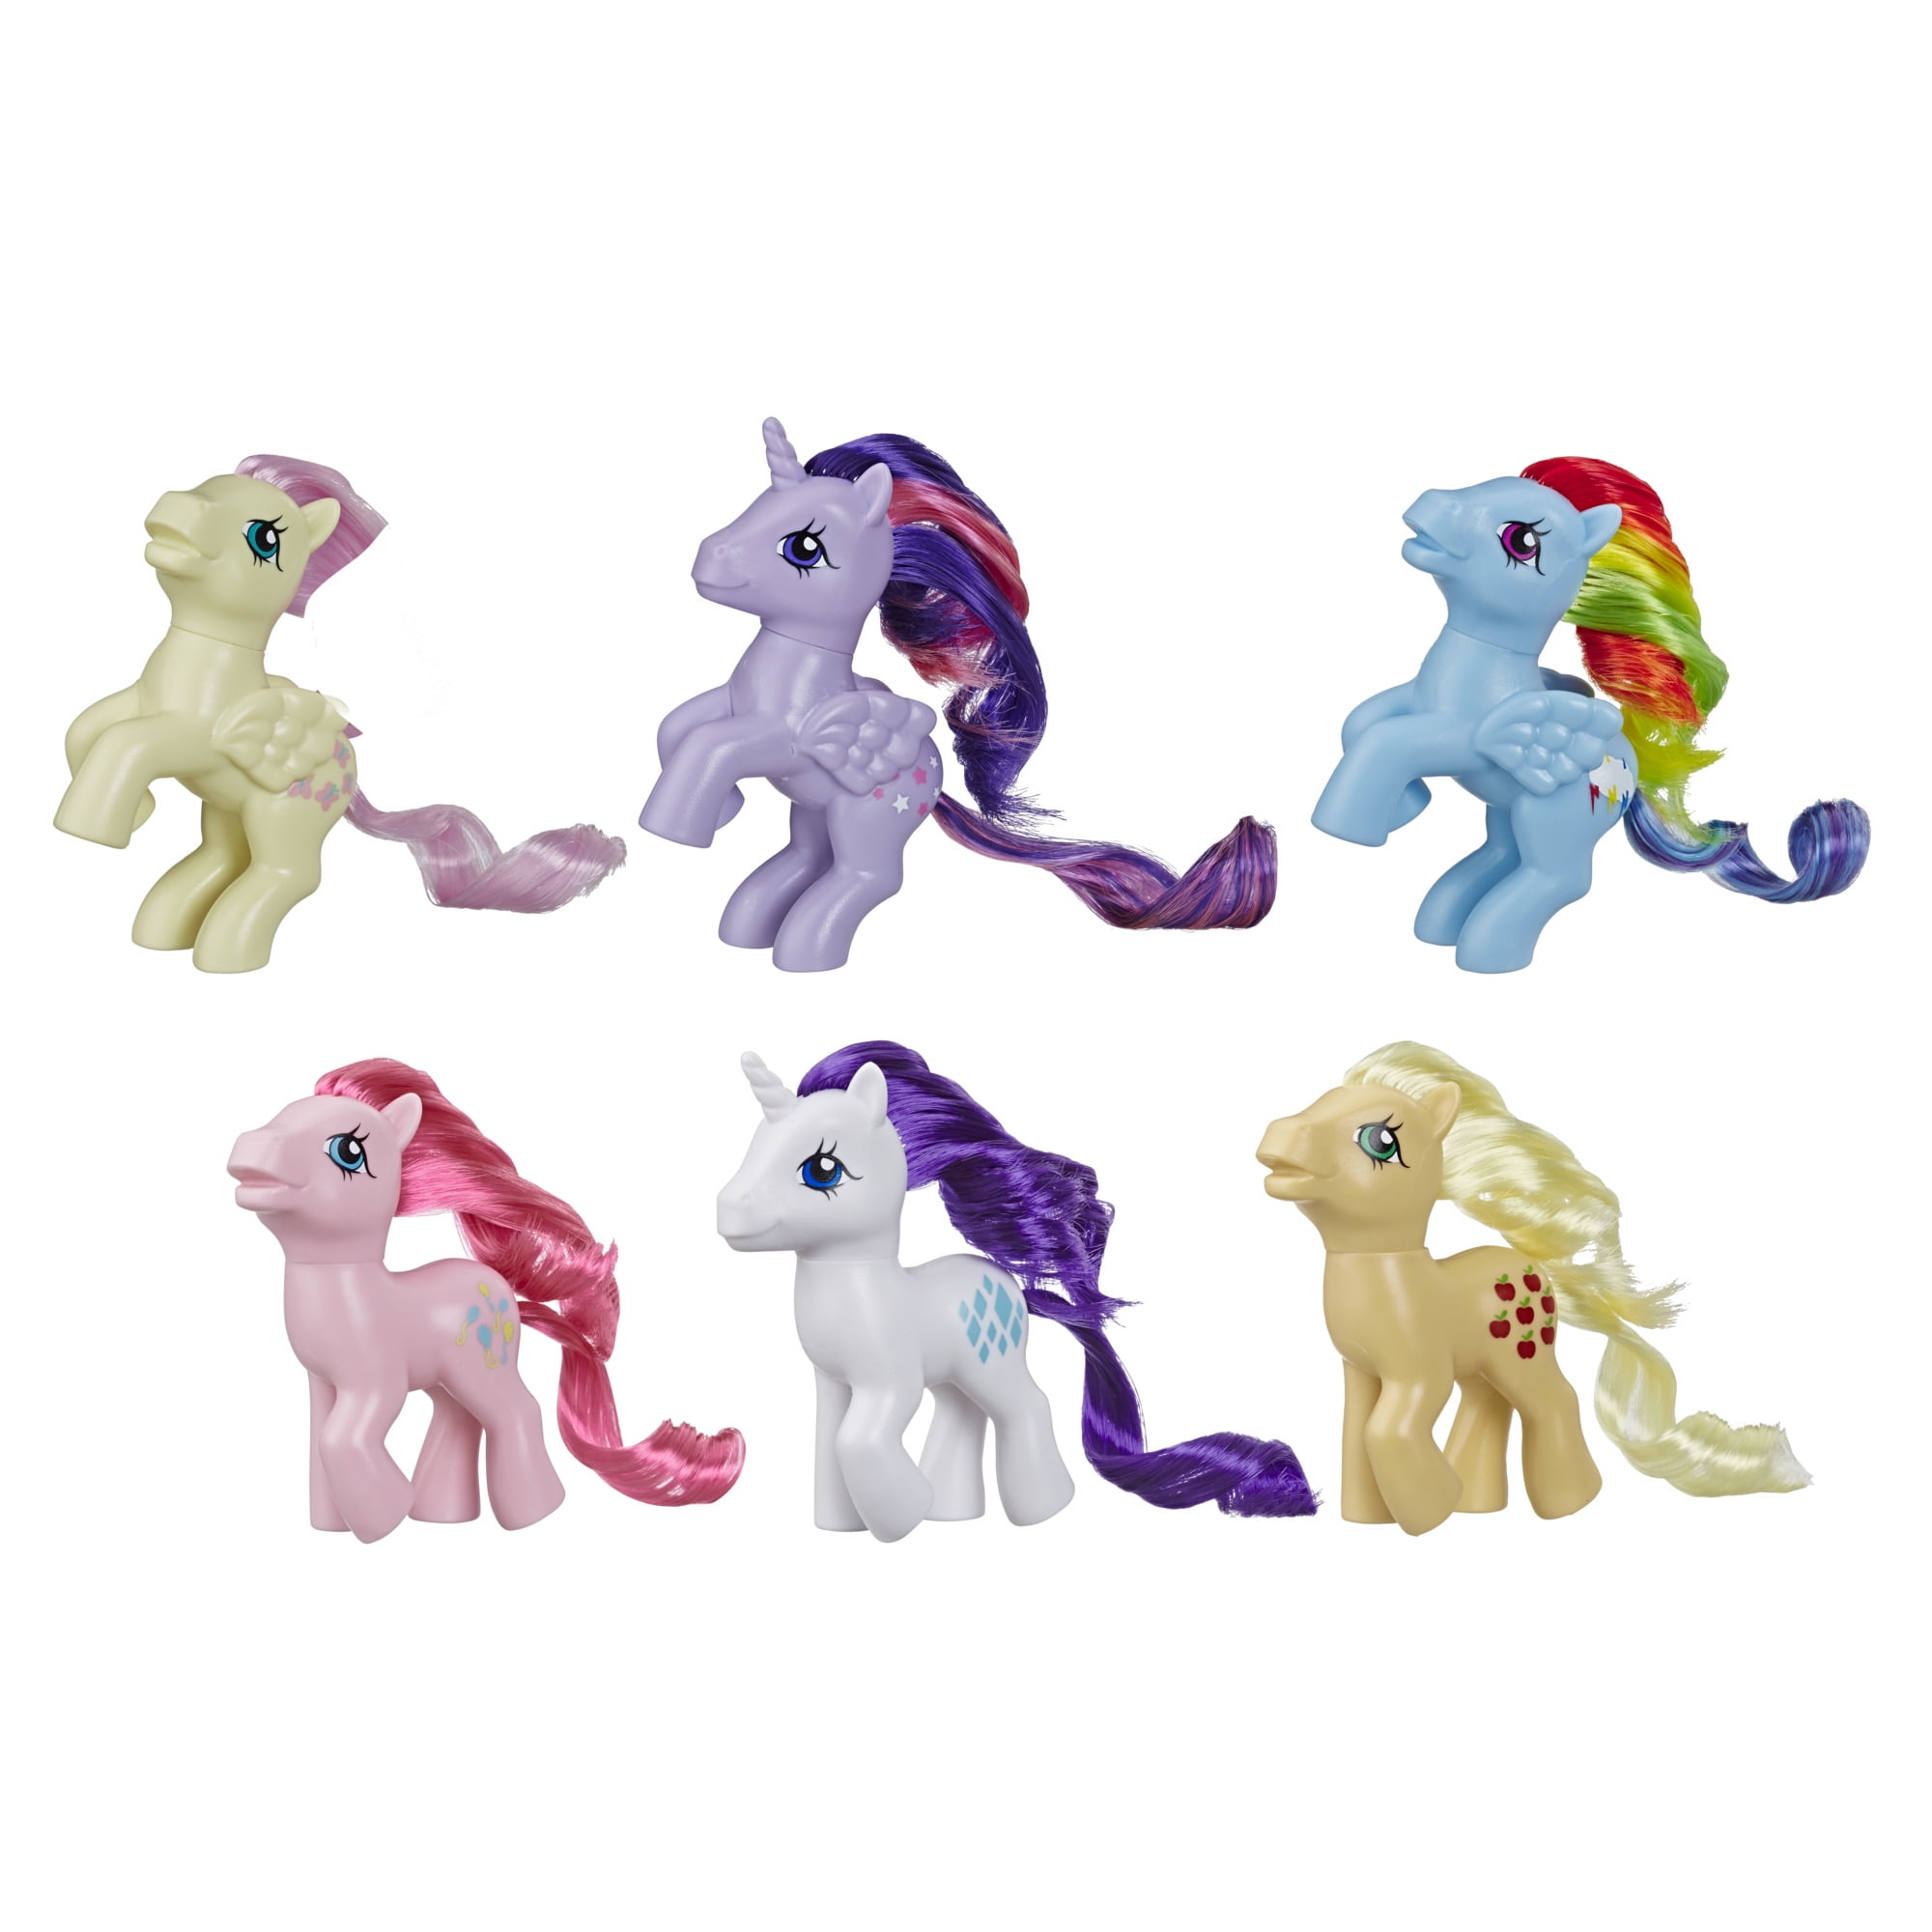 Exclusive 80s-Inspired Collectable Figures with Retro Styling; 6 3-Inch Toys My Little Pony Retro Rainbow Mane 6 